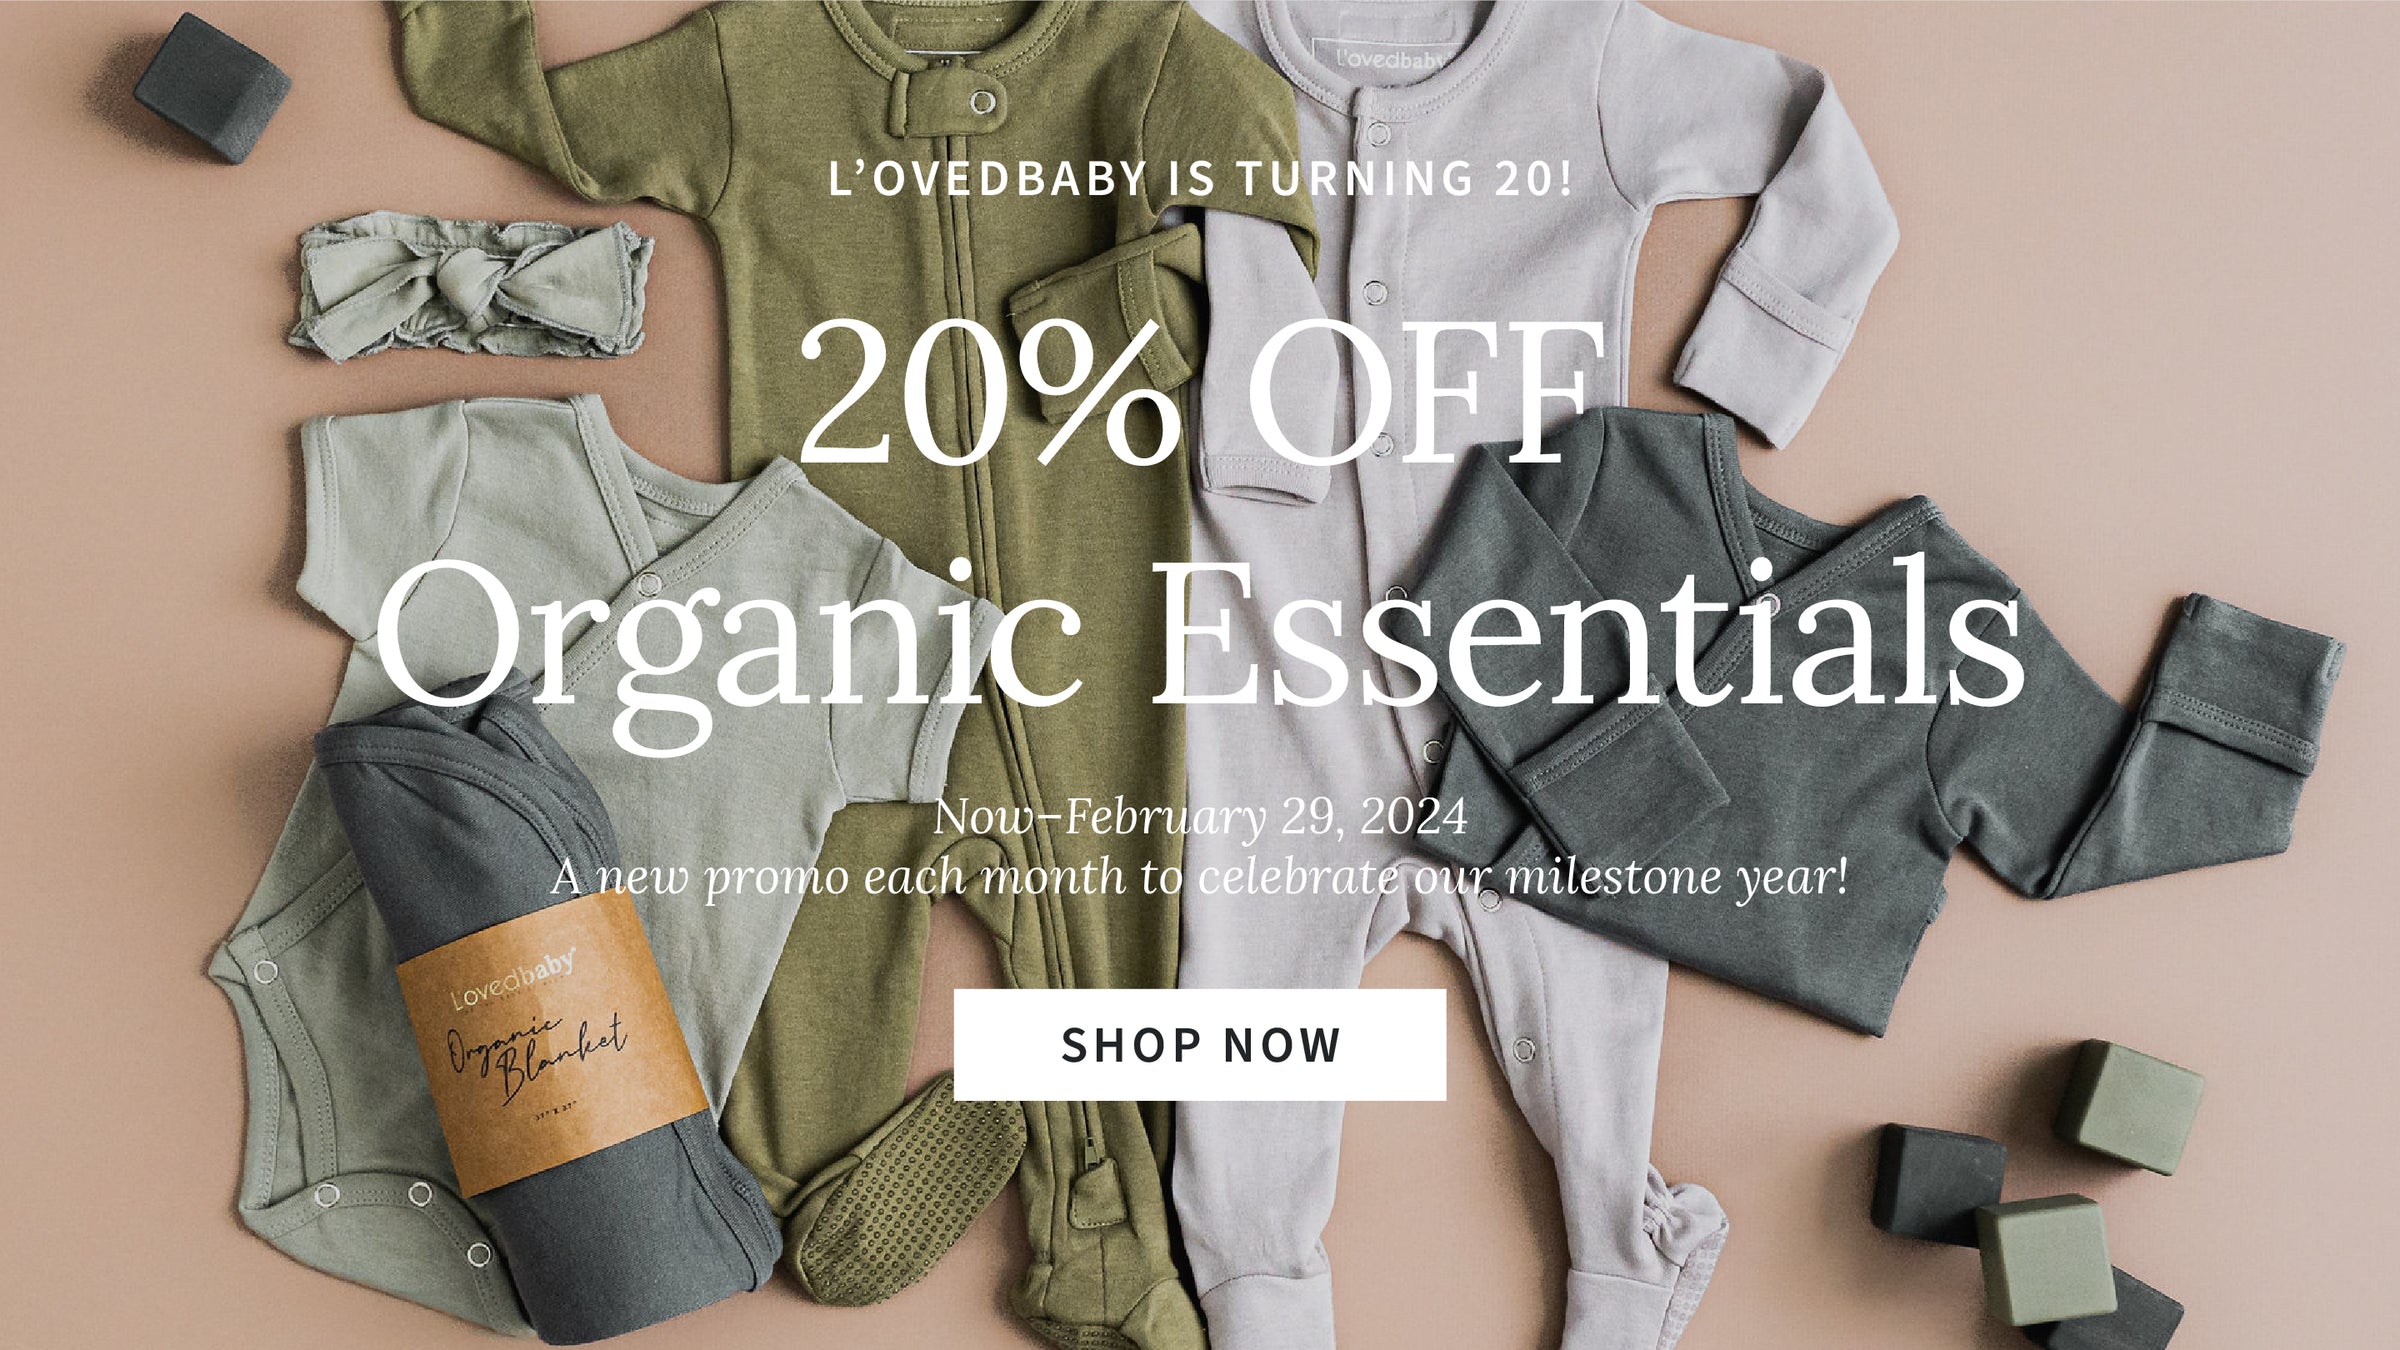 styled flat lay image of organic essentials items in gray and green color palette. overlaid white text says "L'ovedbaby is turning 20! 20% off organic essentials. now - February 29, 2024. a new promo each month to celebrate our milestone year!"